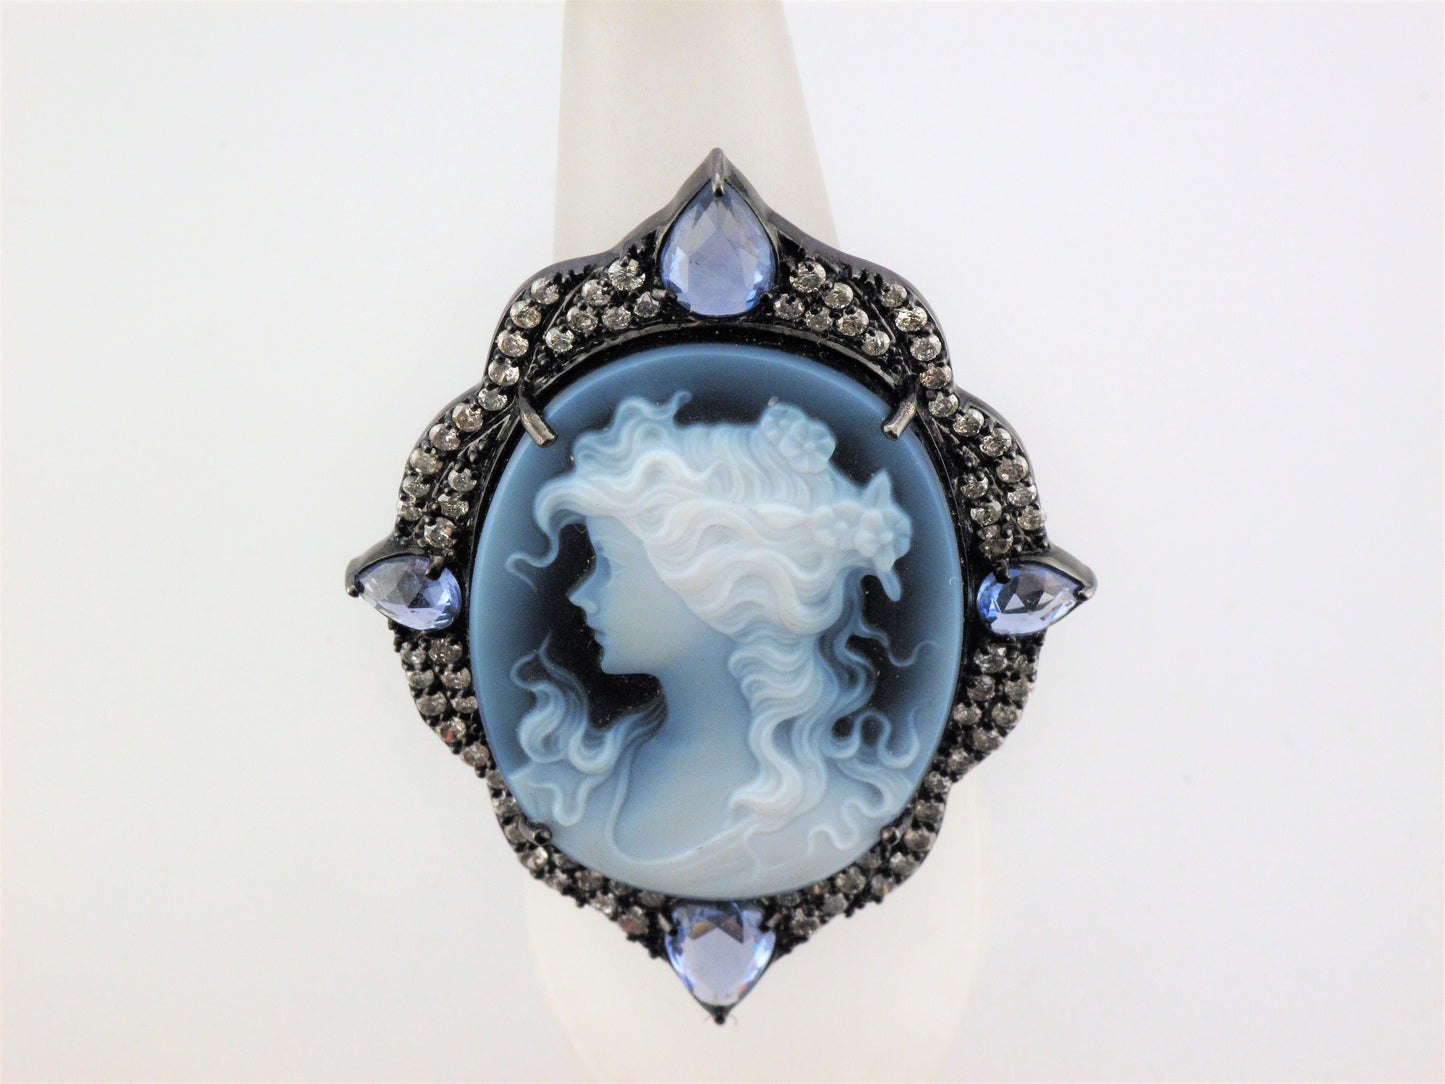 18K Cameo Ring with Sapphire and Diamond Accents